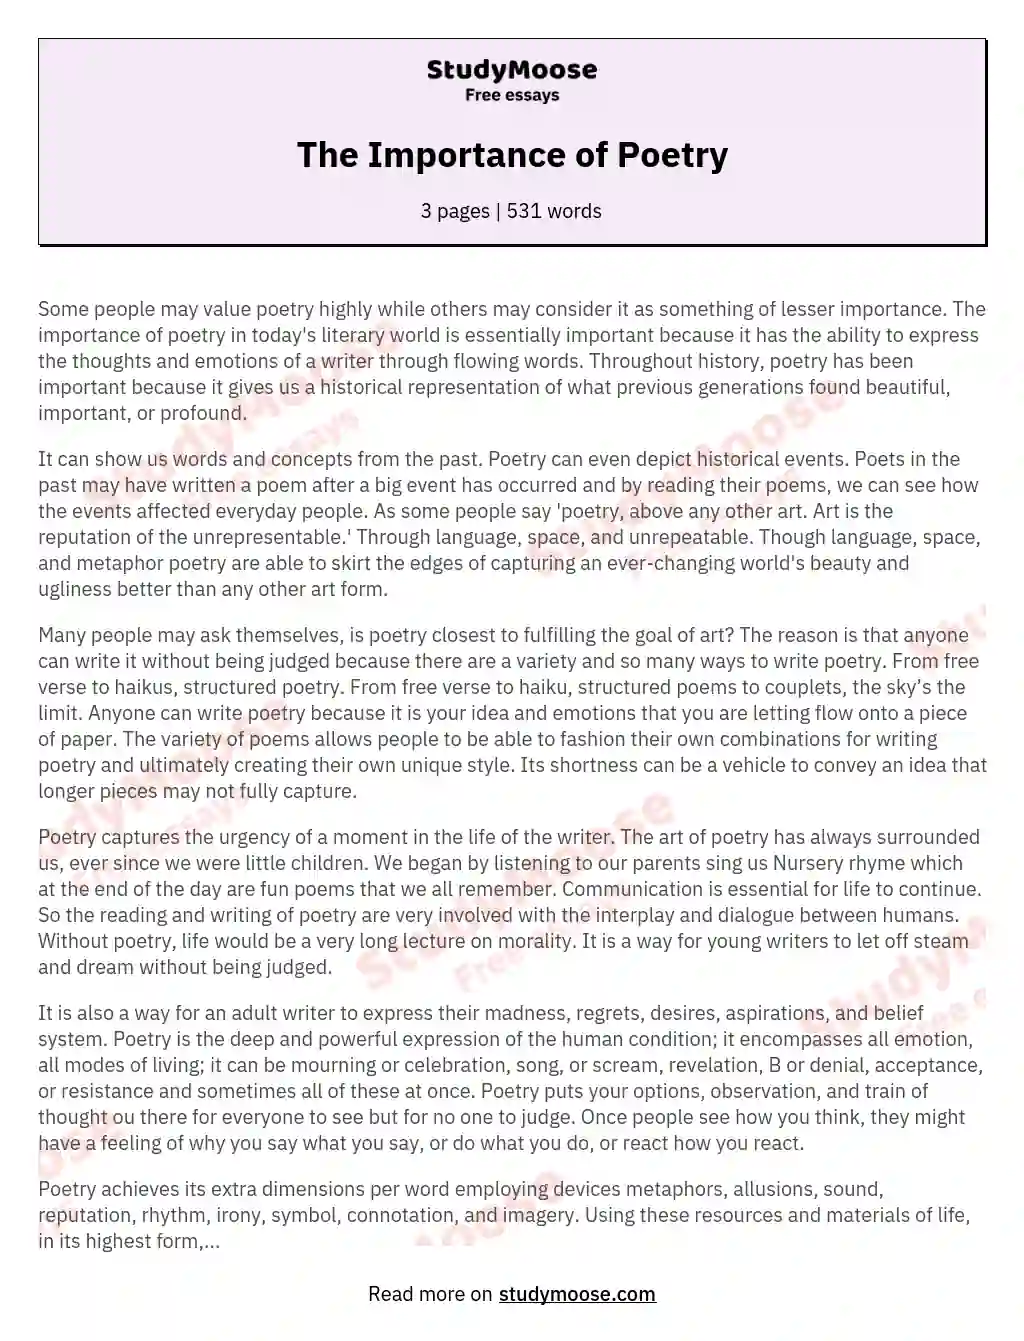 The Importance of Poetry essay